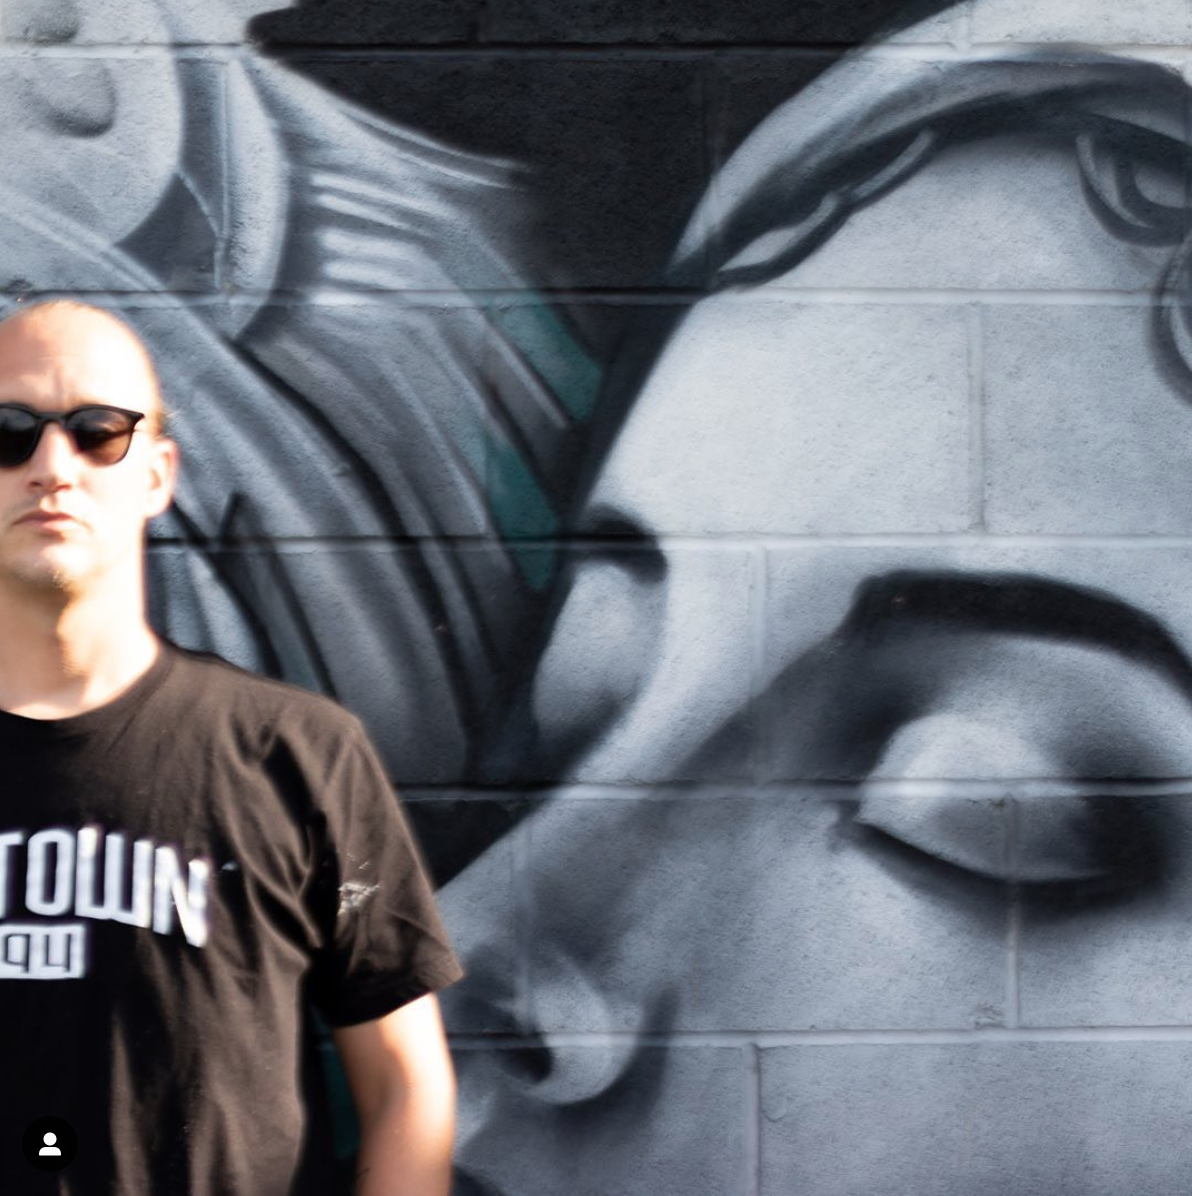 @uptownmainstreet 2nd of 2 profiles on artists of #14thstgraffitimuseum - The Curator! Cory L. Stowers has an encyclopedic knowledge of the local graffiti and mural culture.